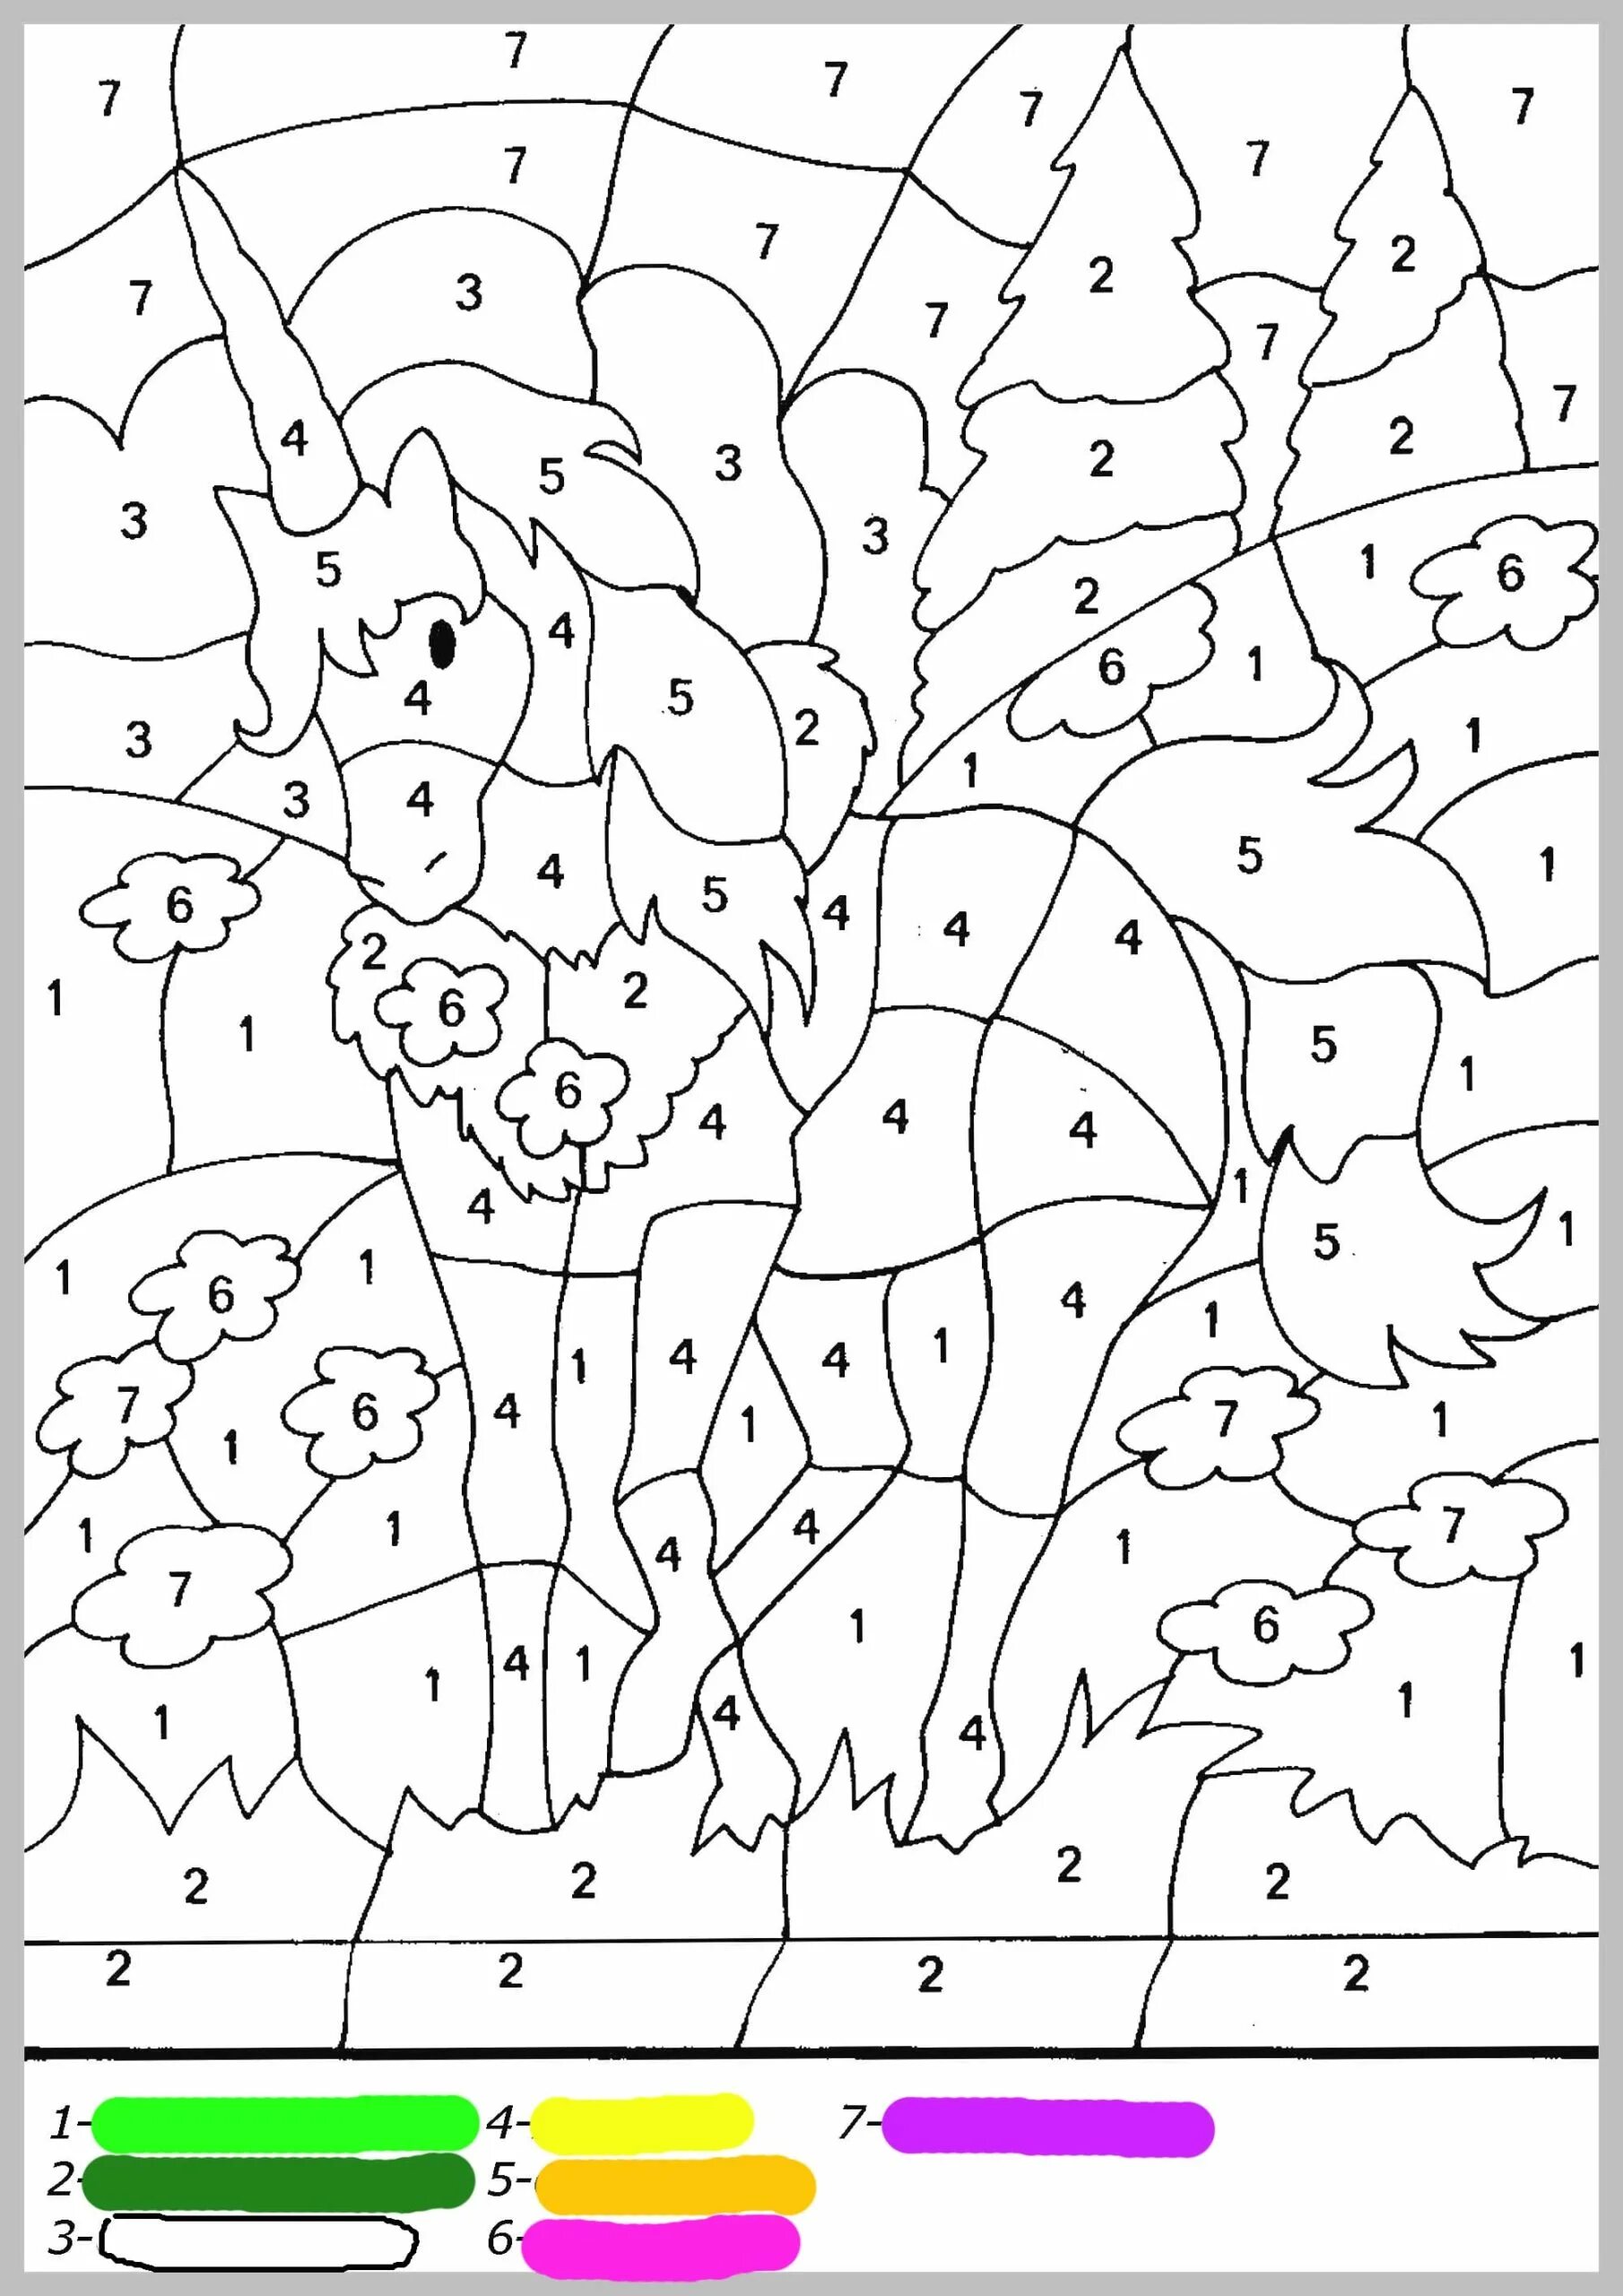 Inspiring coloring book download by number coloring book